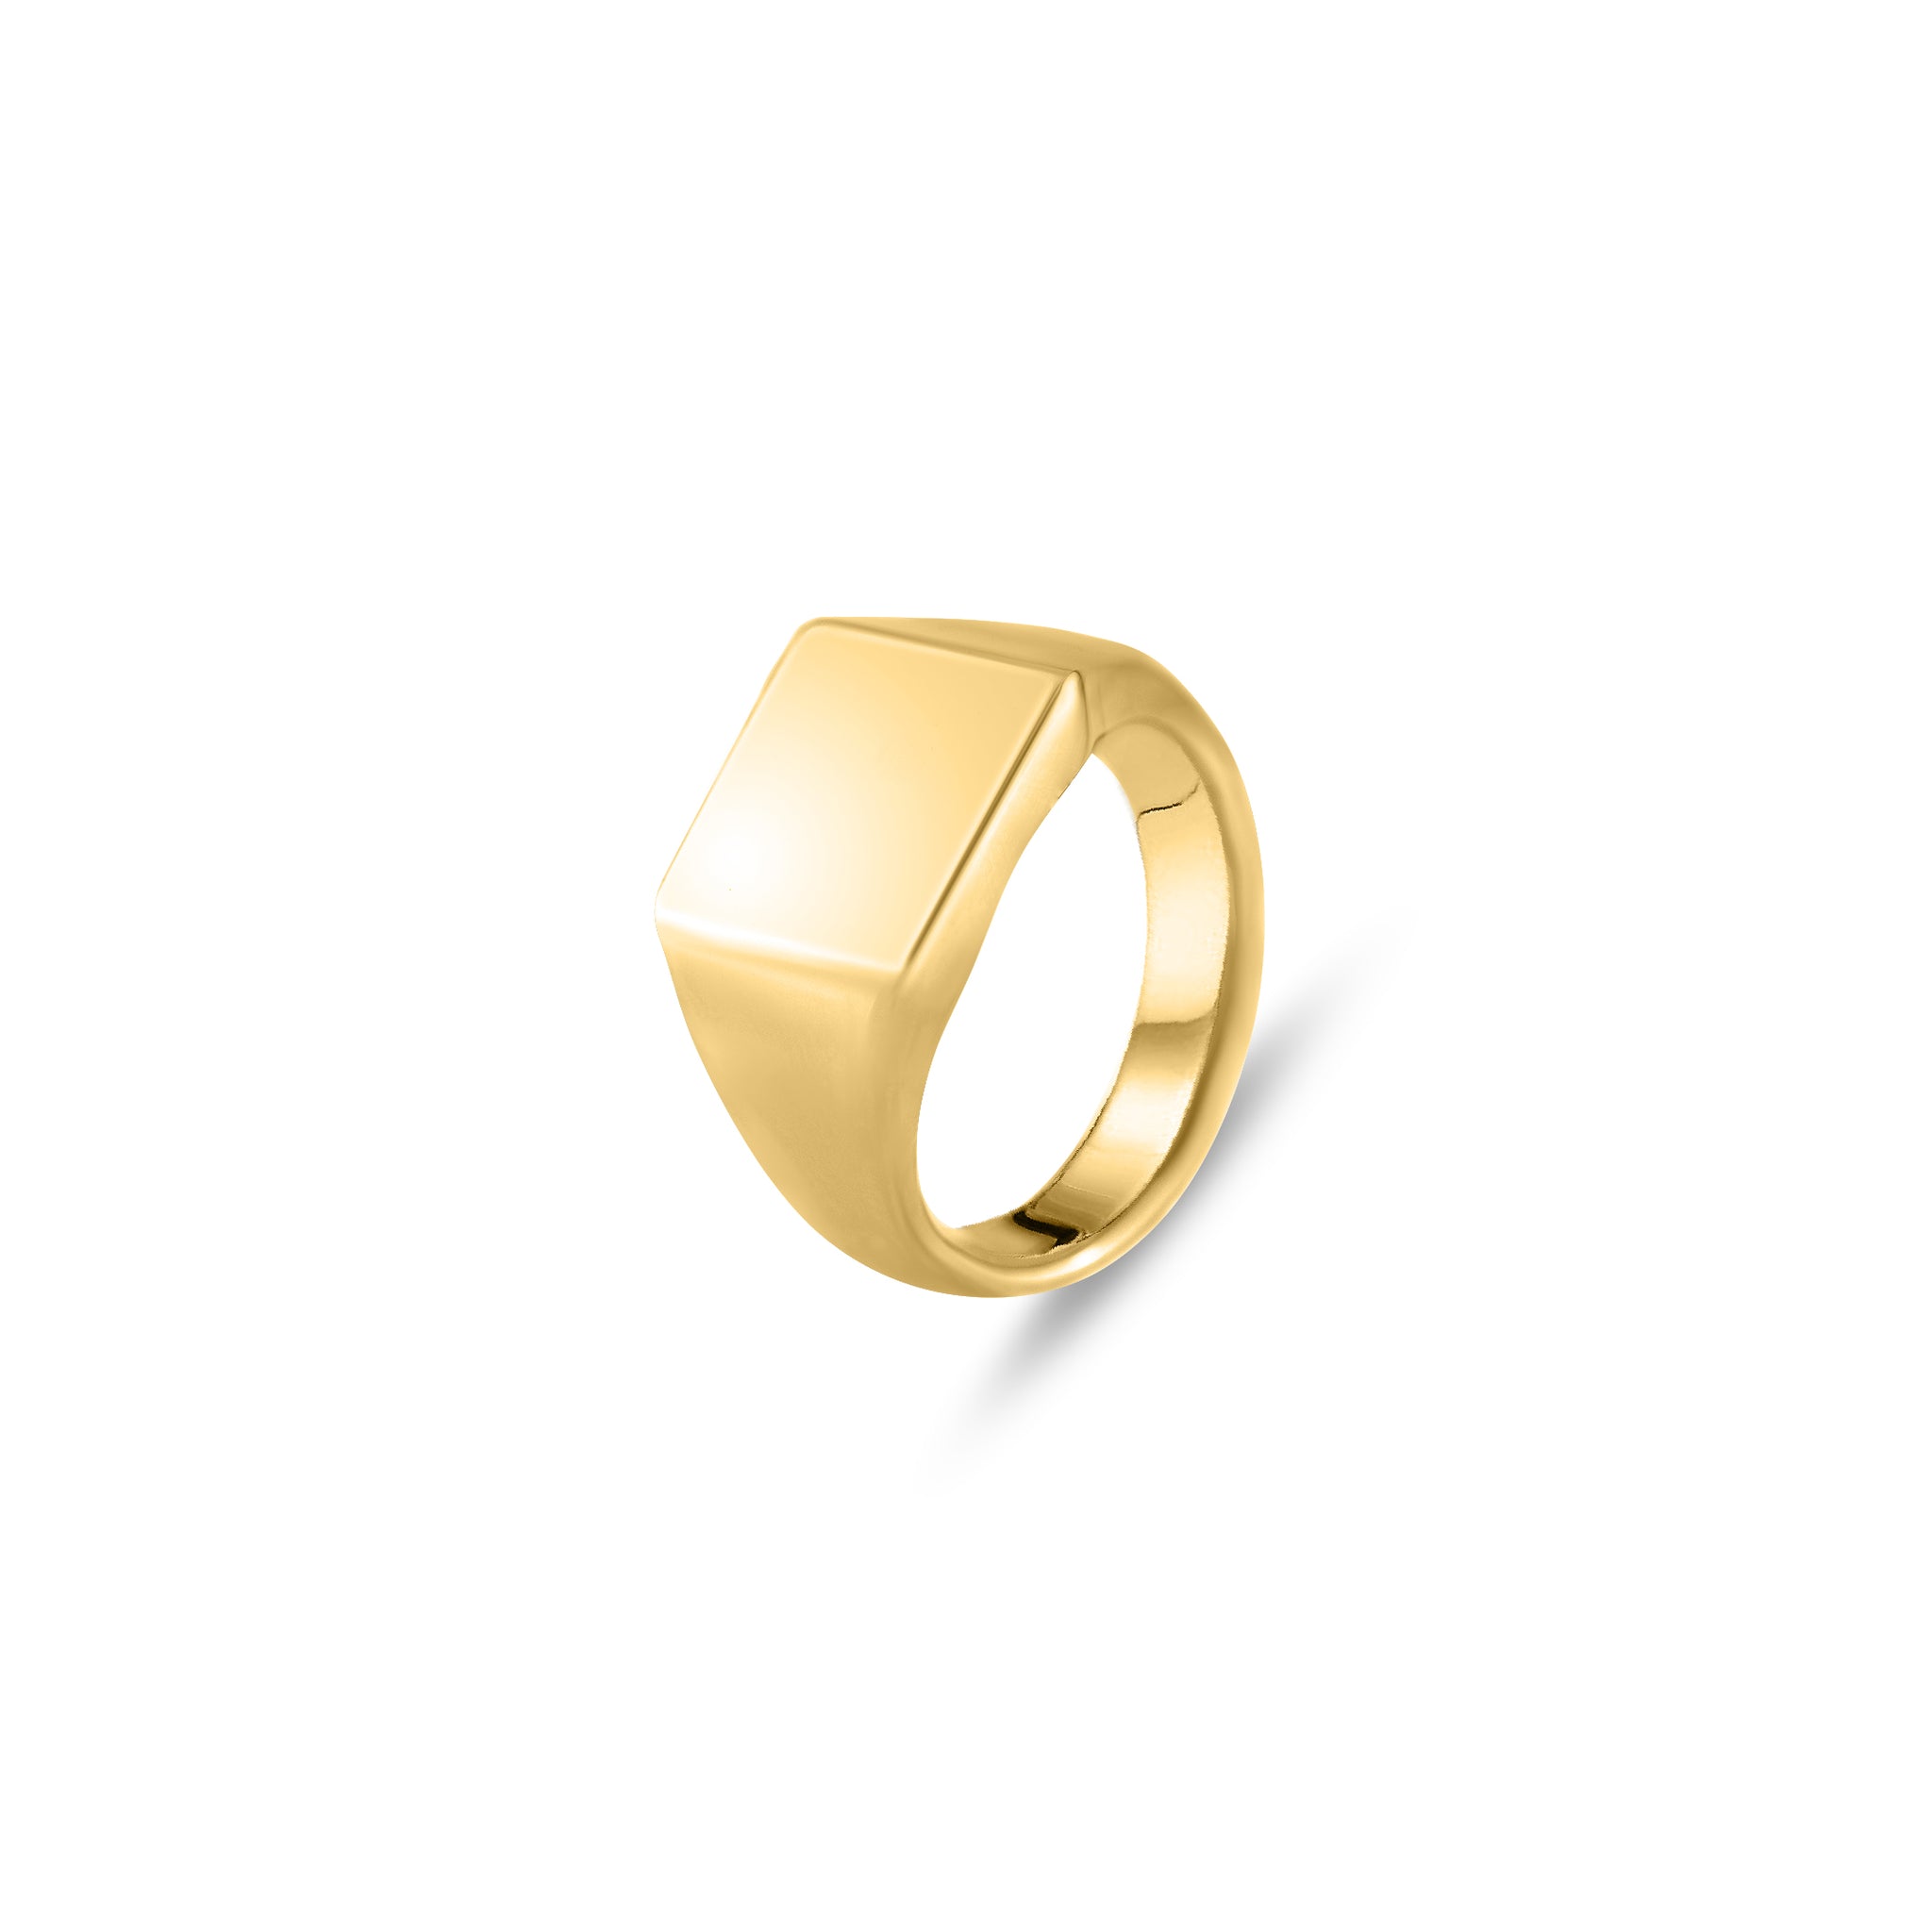 18ct Yellow Gold 12 x 12mm Square Signet Ring